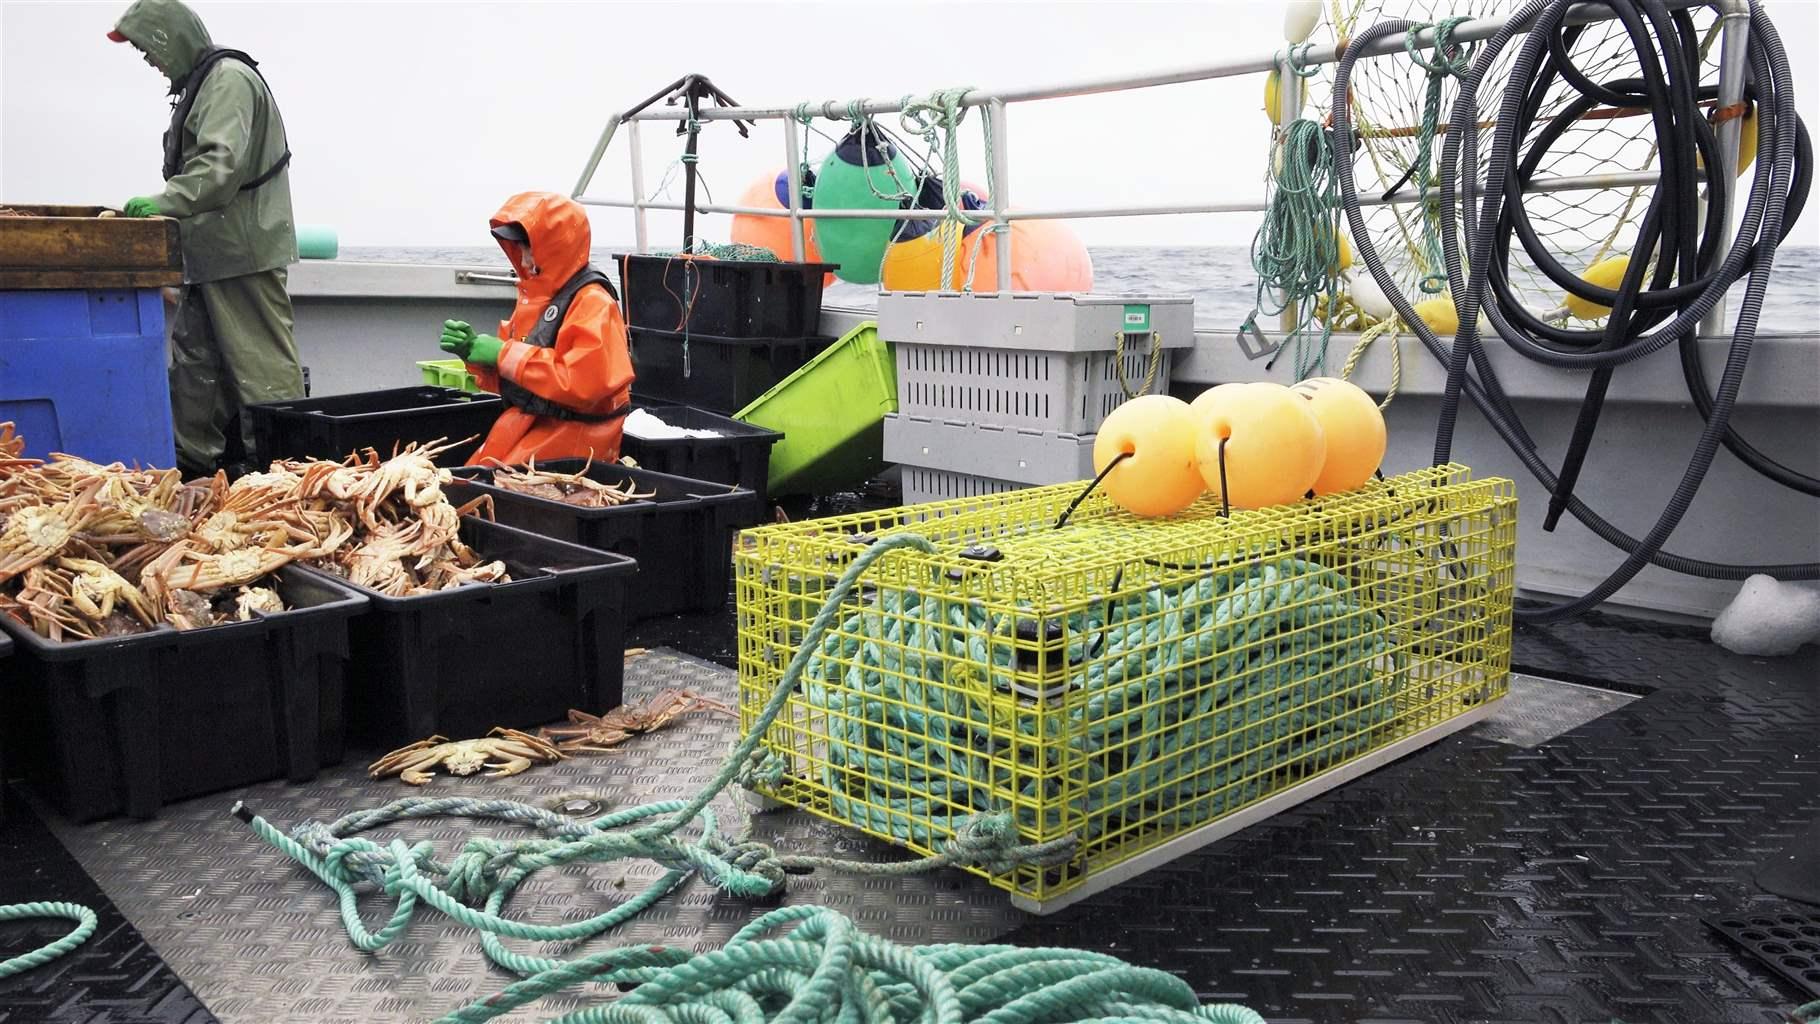 Fishermen in Canada’s Gulf of St. Lawrence use” on-demand” gear to retrieve their crab traps. While traditional fishing gear relies on many ropes to connect to the surface and can pose serious entanglement danger to North Atlantic right whales and other marine life, on-demand systems can minimize these threats.